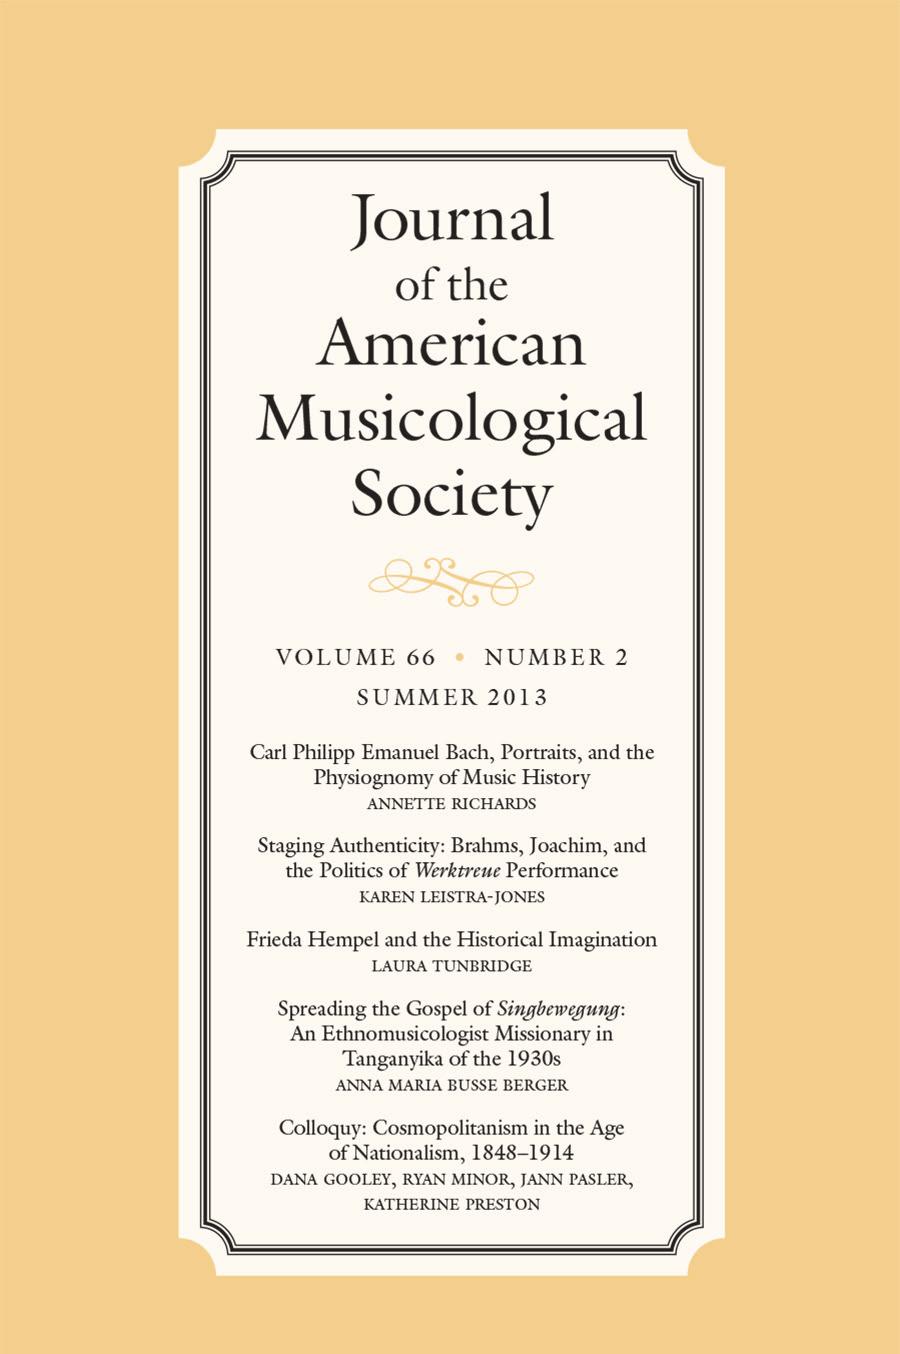 JOURNAL OF THE AMERICAN MUSICOLOGICAL SOCIETY Full page: 4 ½ x 7 ½ $ 475 Half page: 4 ½ x 3 ¾ $ 360 Cover 4: 4 ½ x 7 ½ $ 600 April February 15 March 1 August June 15 July 1 December October 15